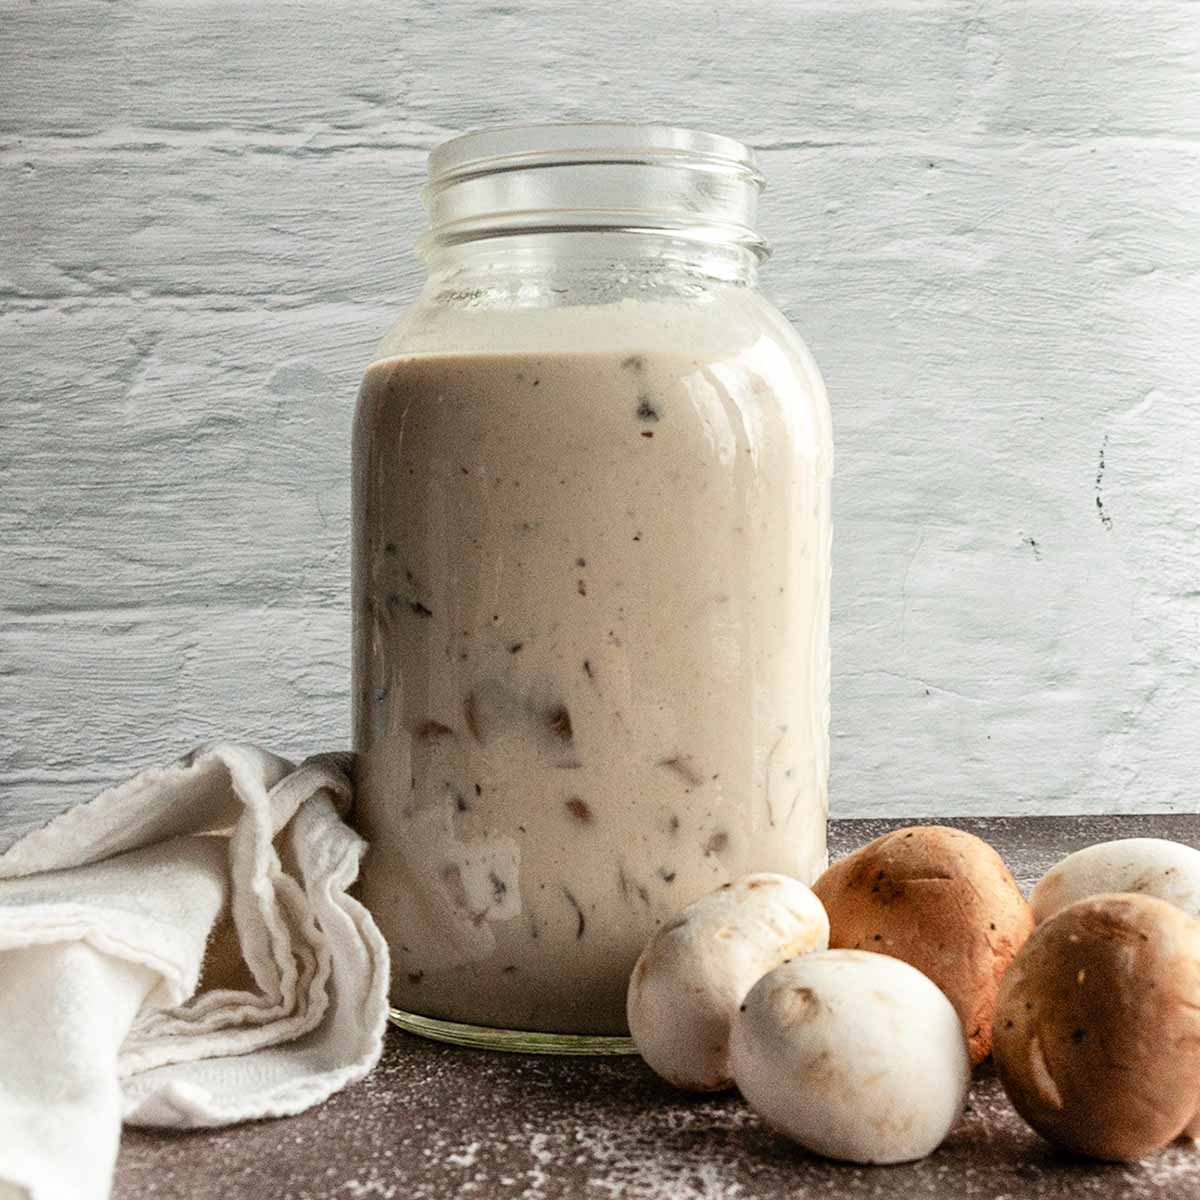 A jar filled with creamy mushroom sauce with some mushrooms next ot it.